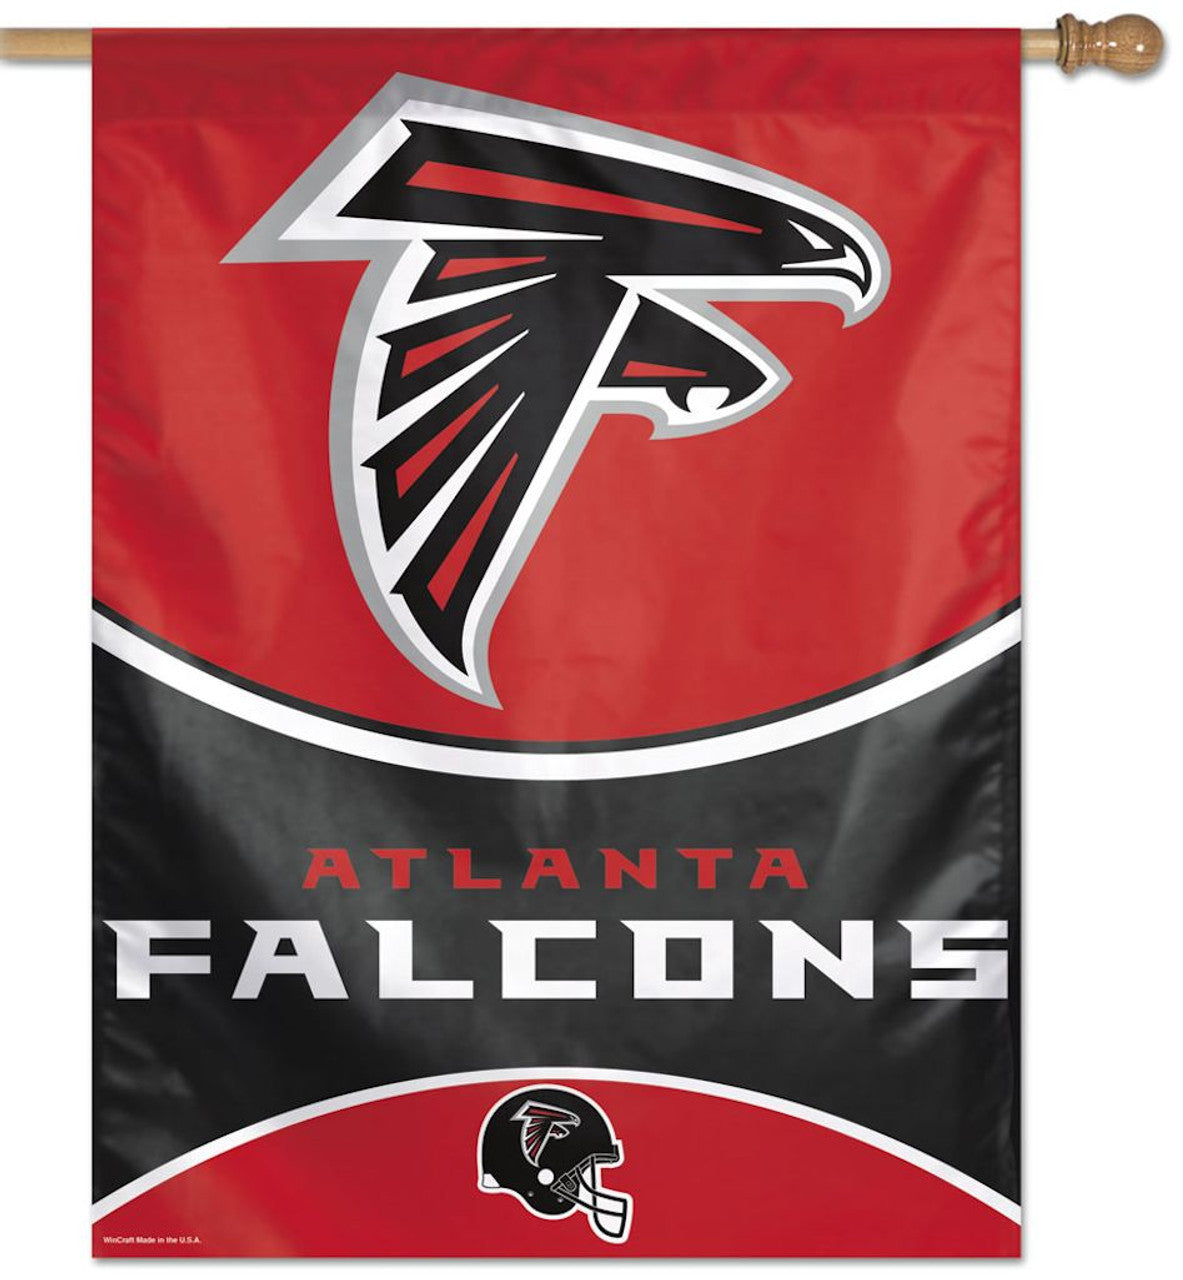 Atlanta Falcons 27" x 37" Vertical House Flag/Banner by Wincraft